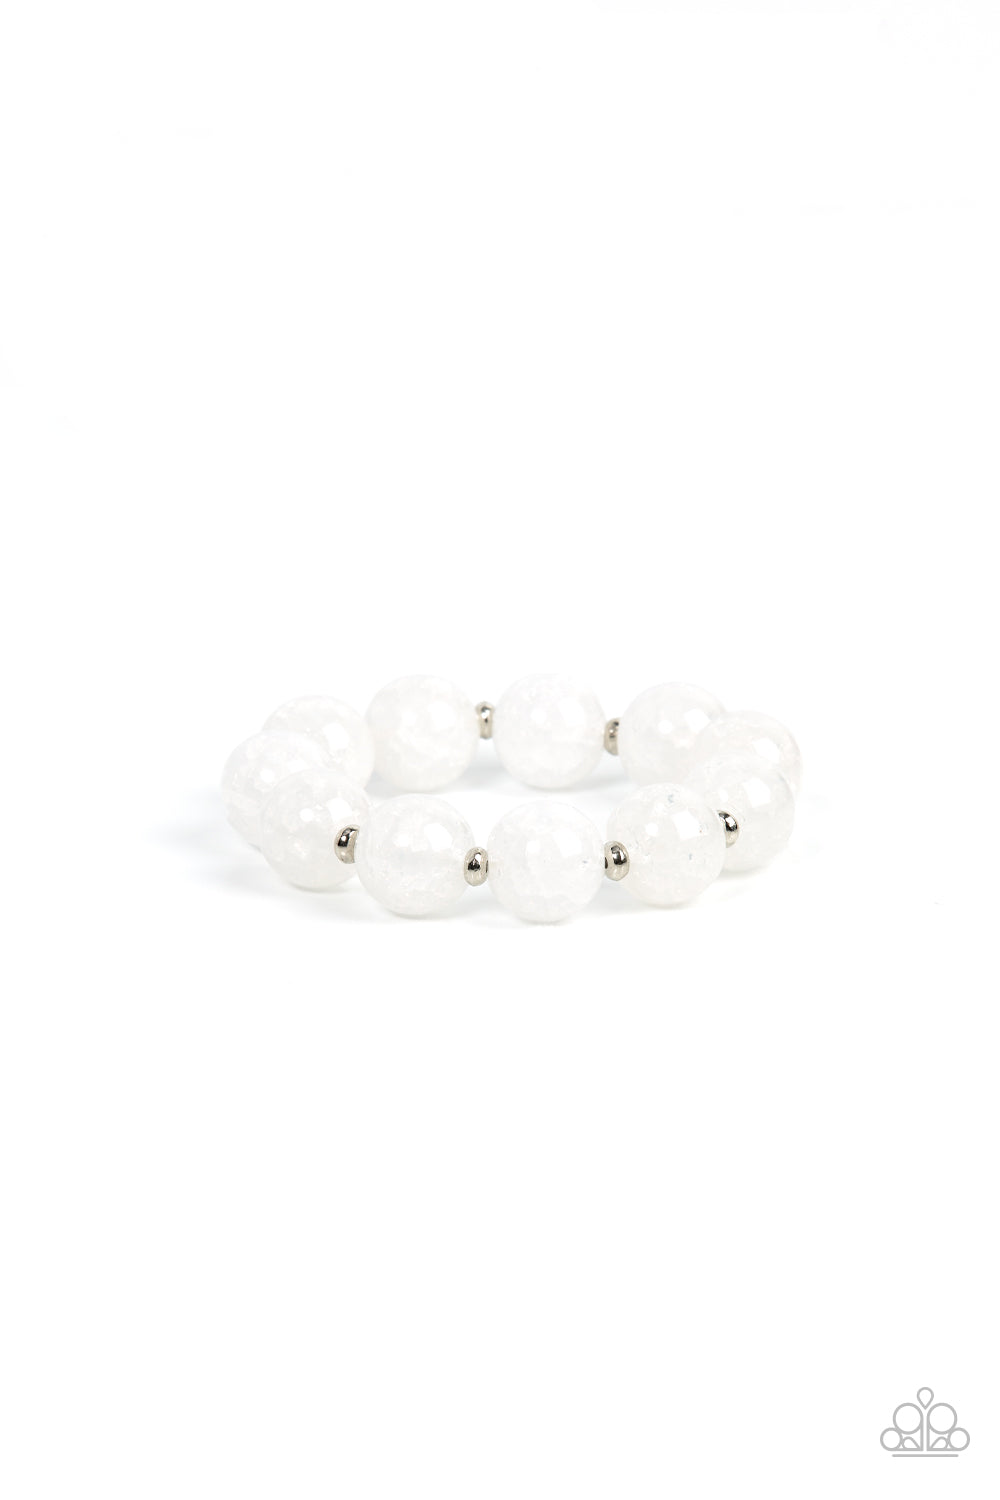 Arctic Affluence - White ***COMING SOON*** - Bling With Crystal